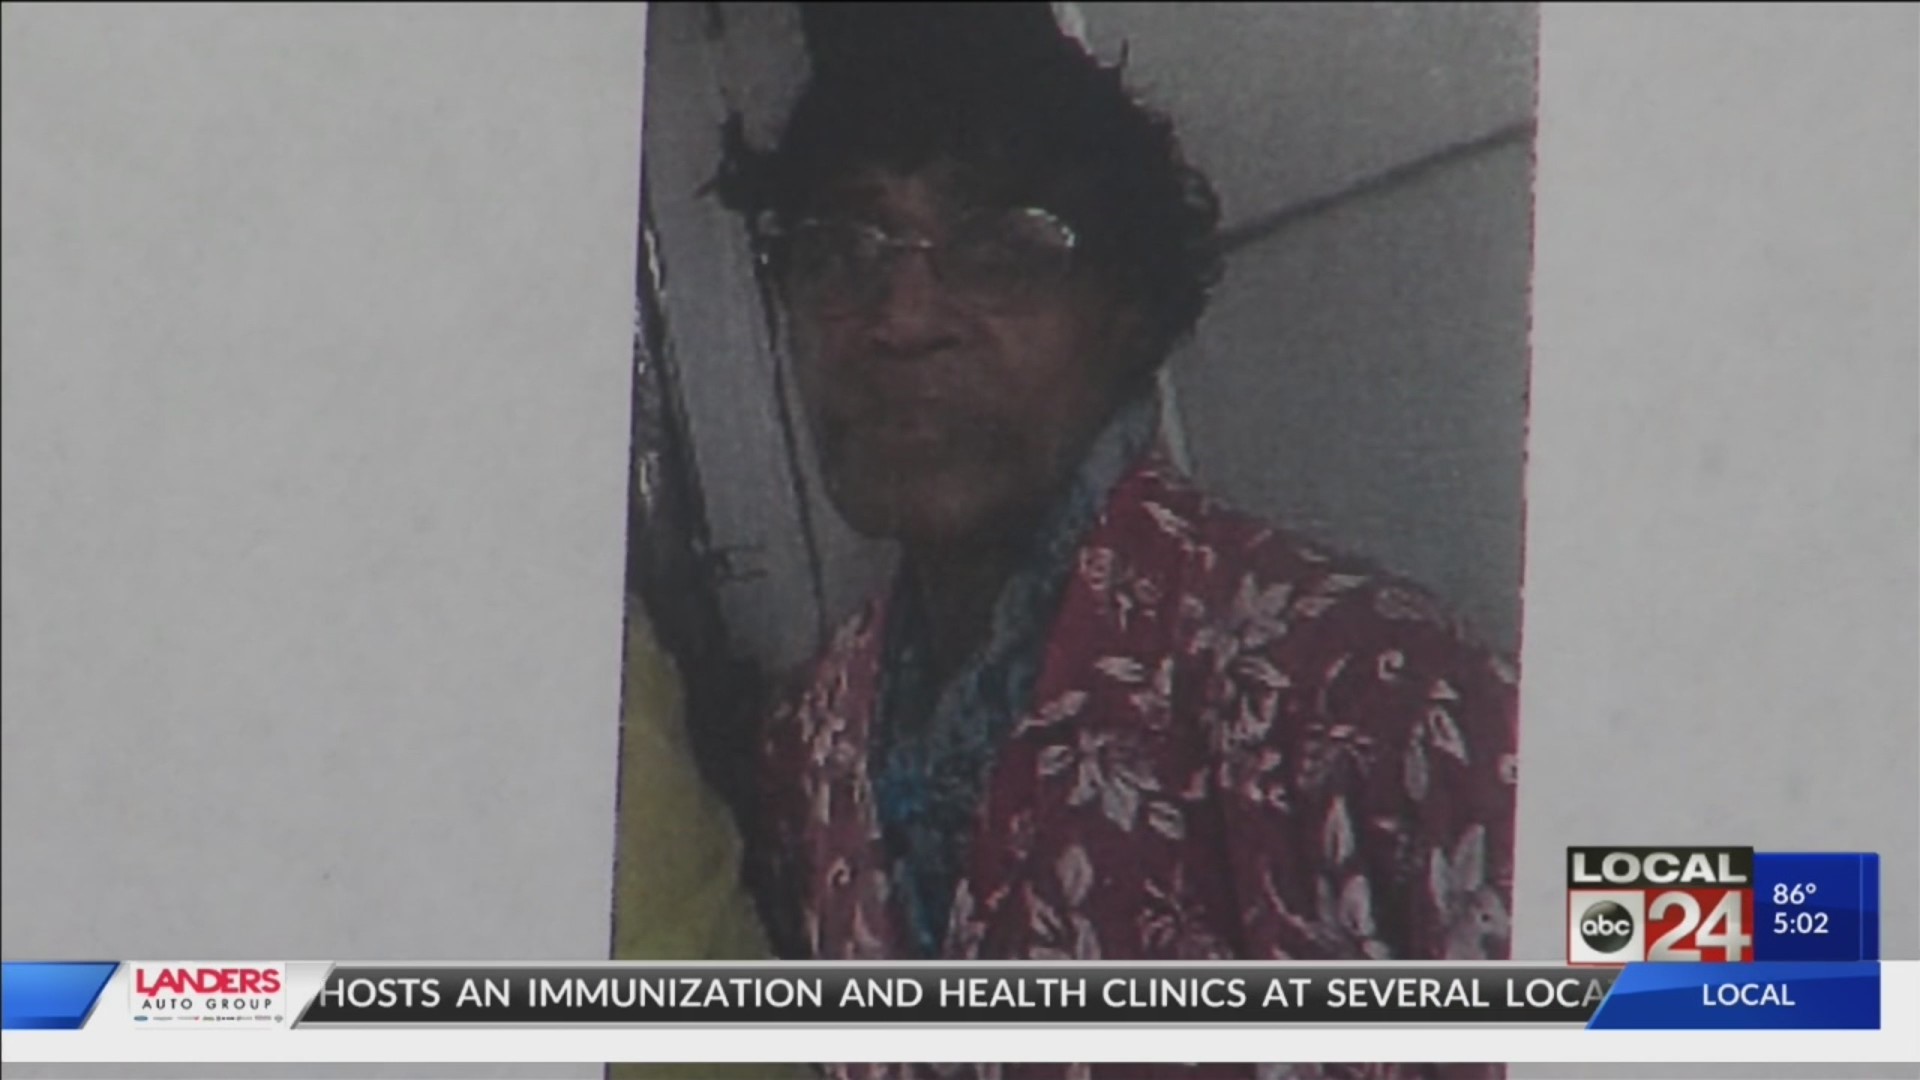 Reward increased to $15,000 for 85-year-old Pandora Duckett, missing since January